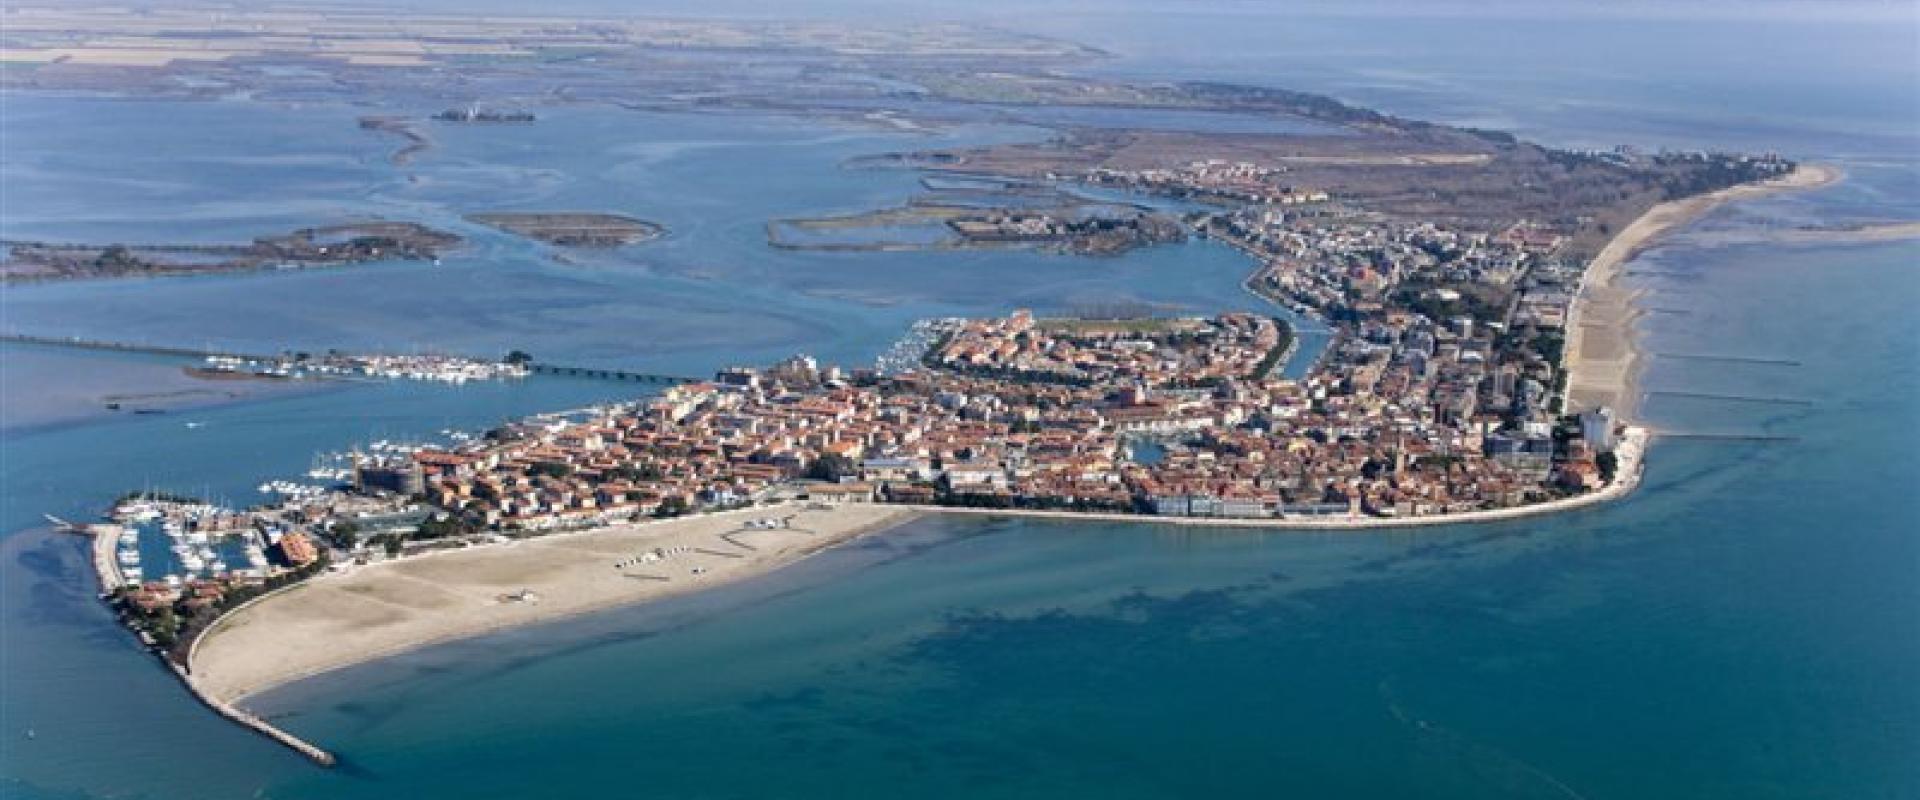 Visit of Grado and the natural reserve of Isonzo river